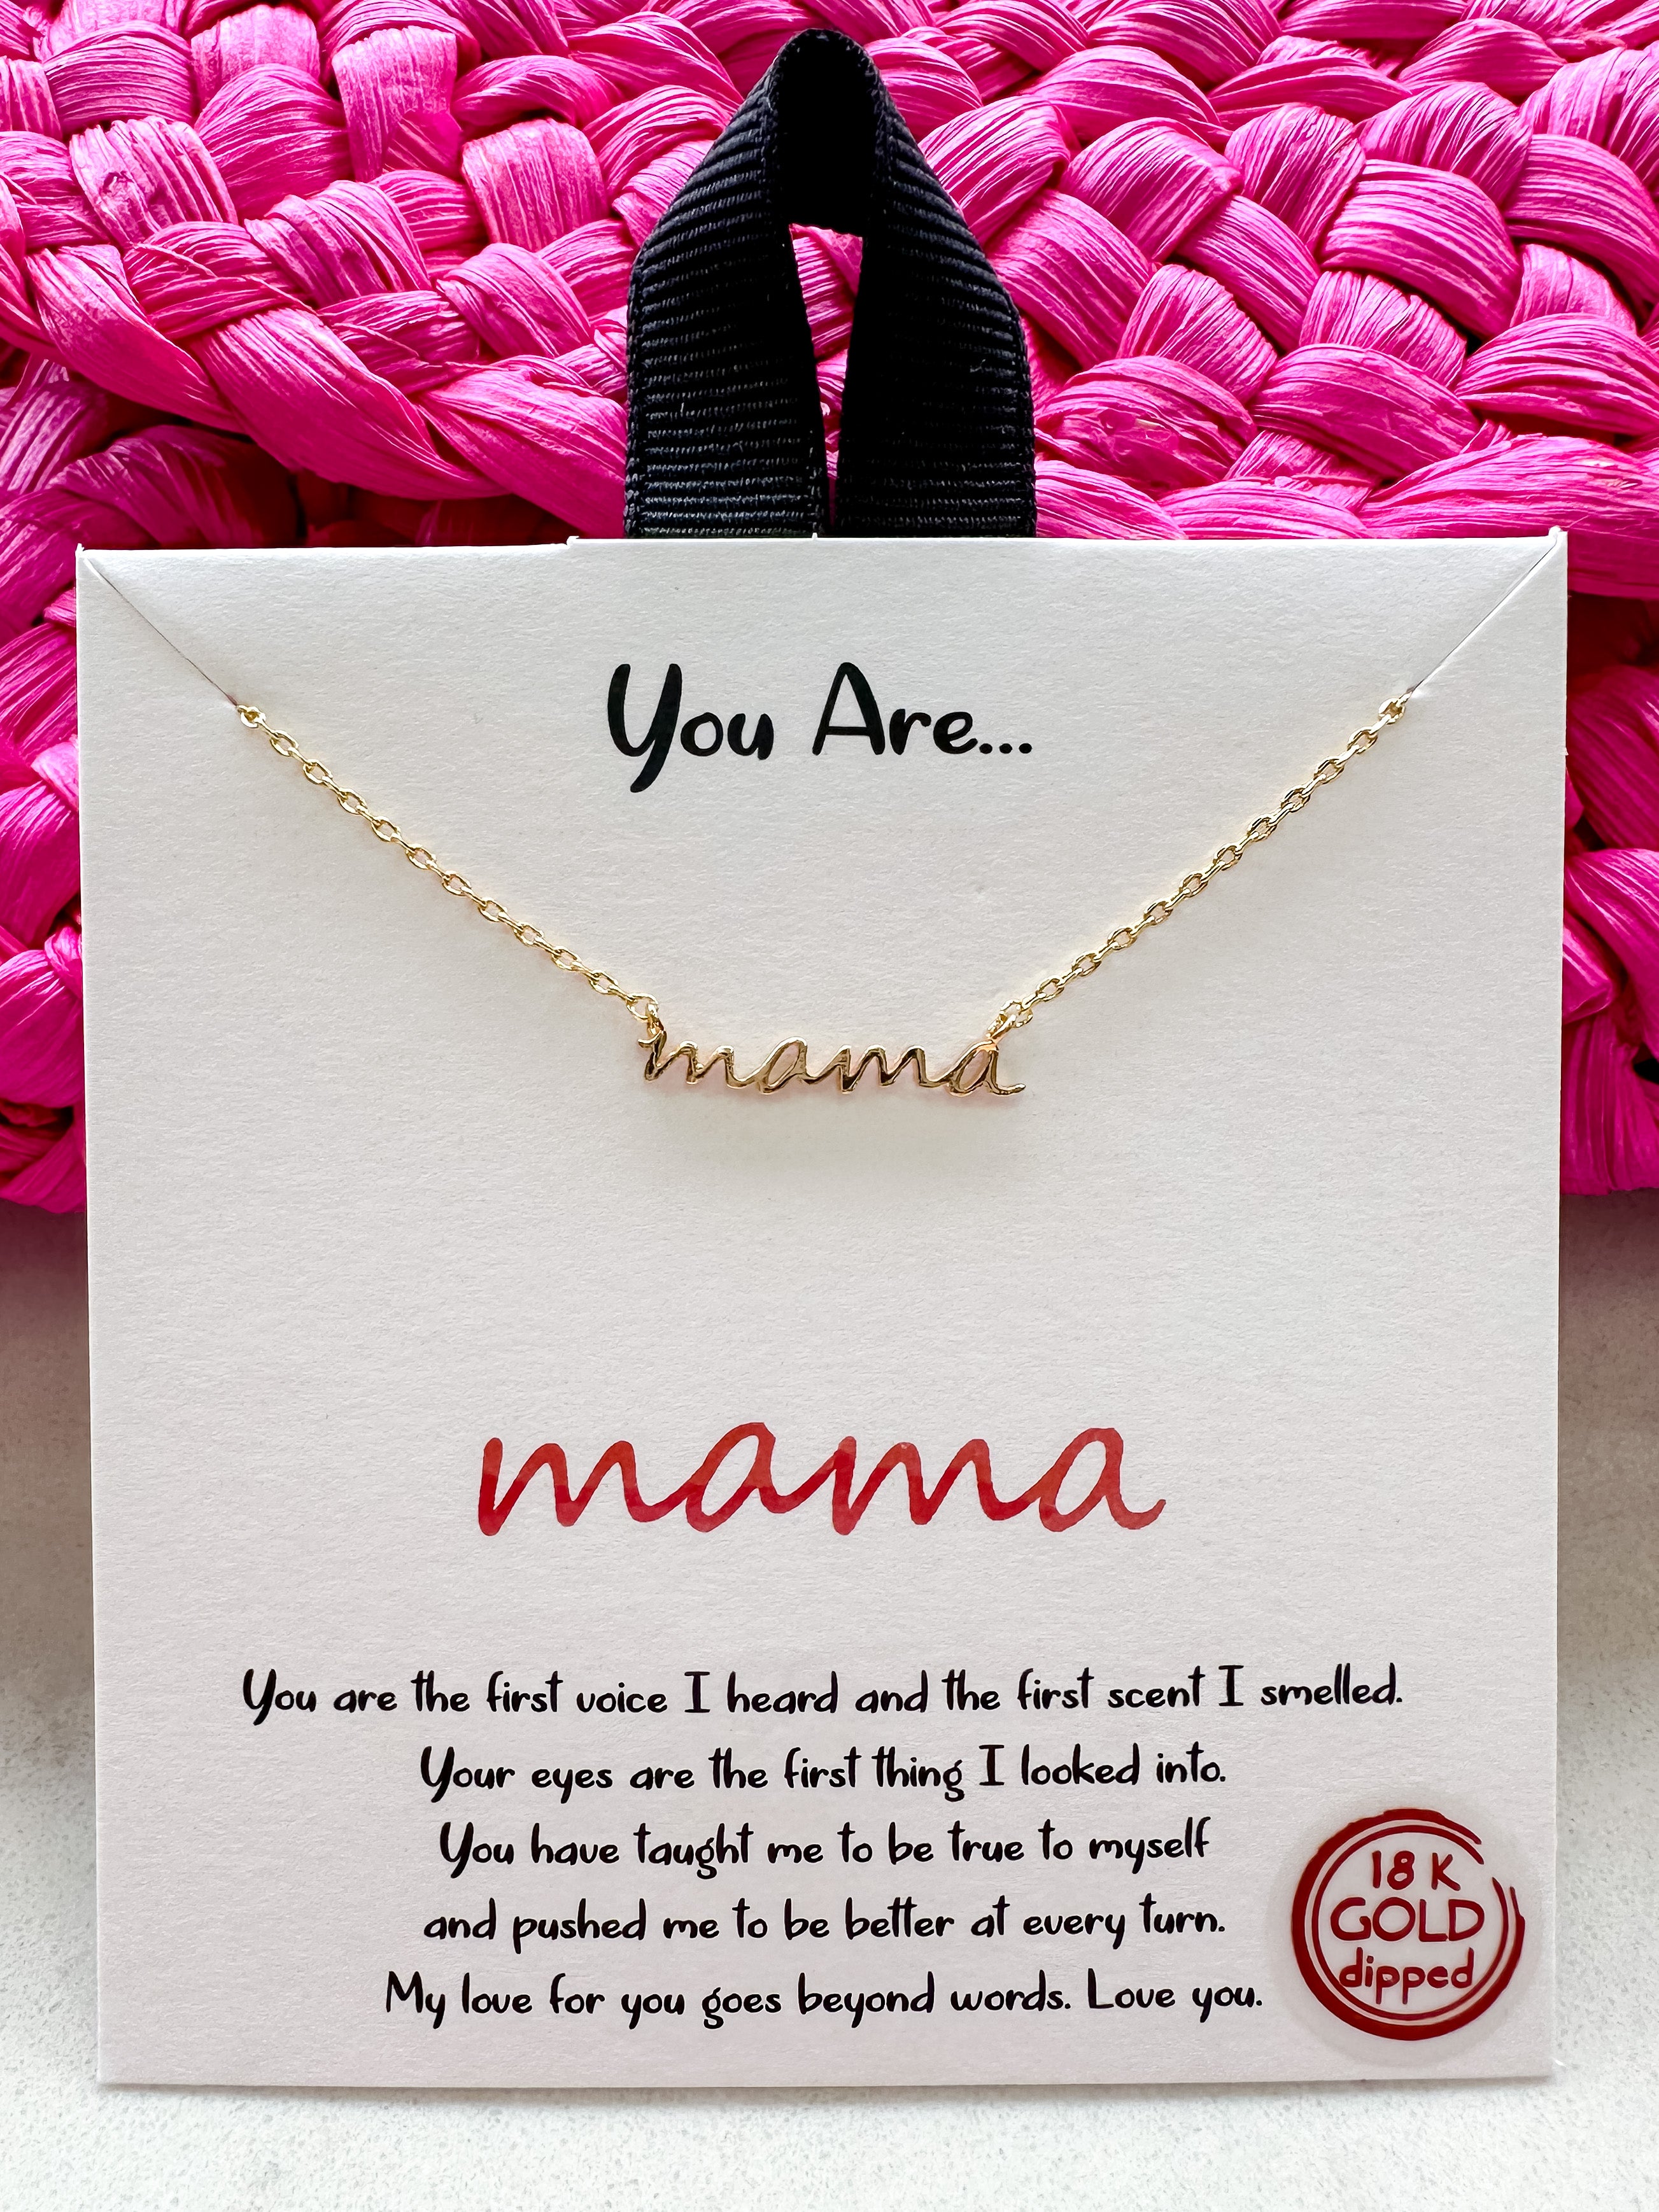 Mama Necklace in Gold